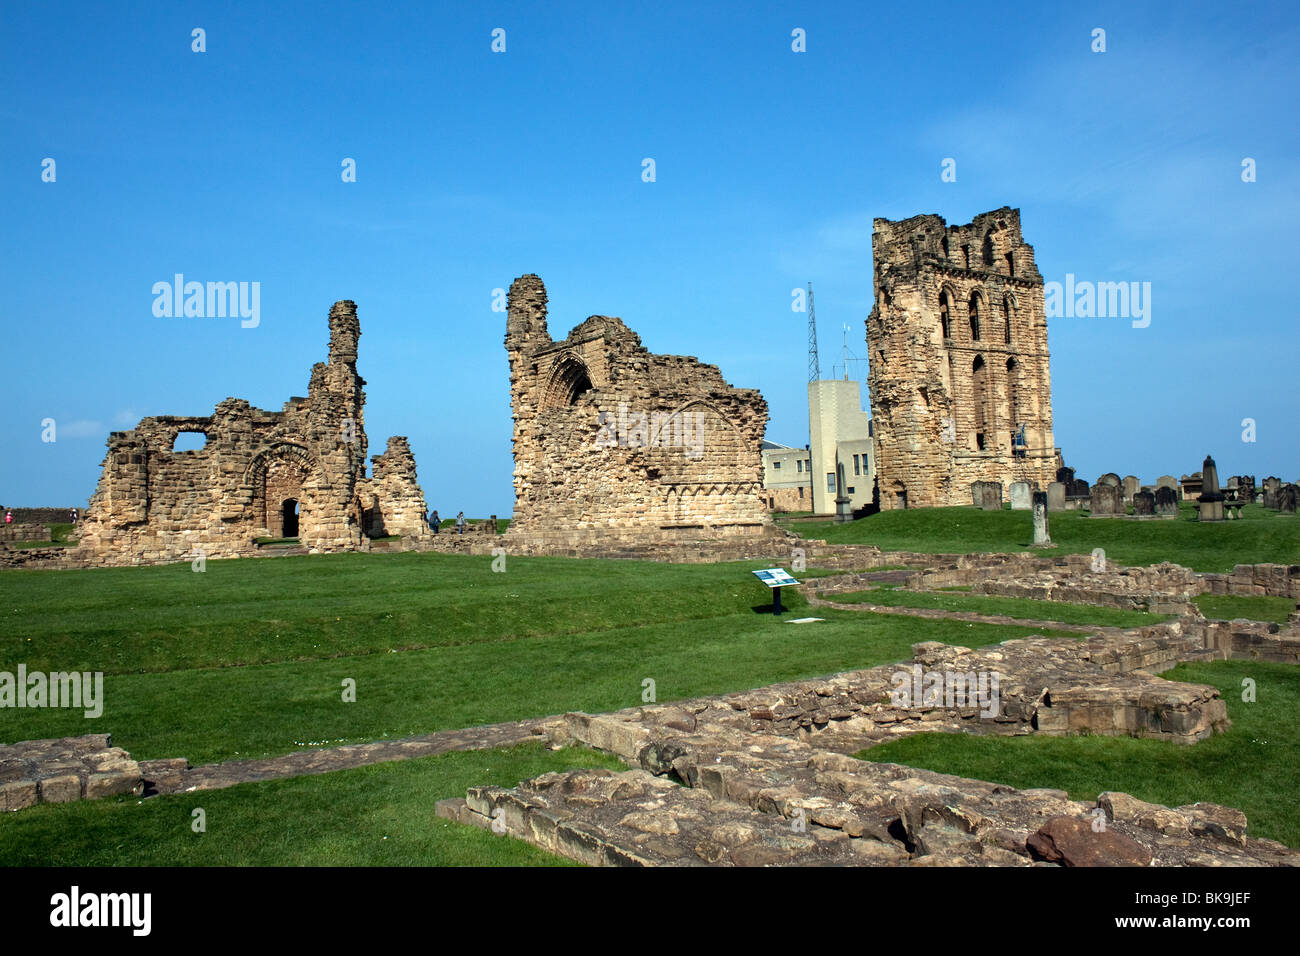 Inside the Priory castle Tynemouth,  on the north east coast of England Stock Photo